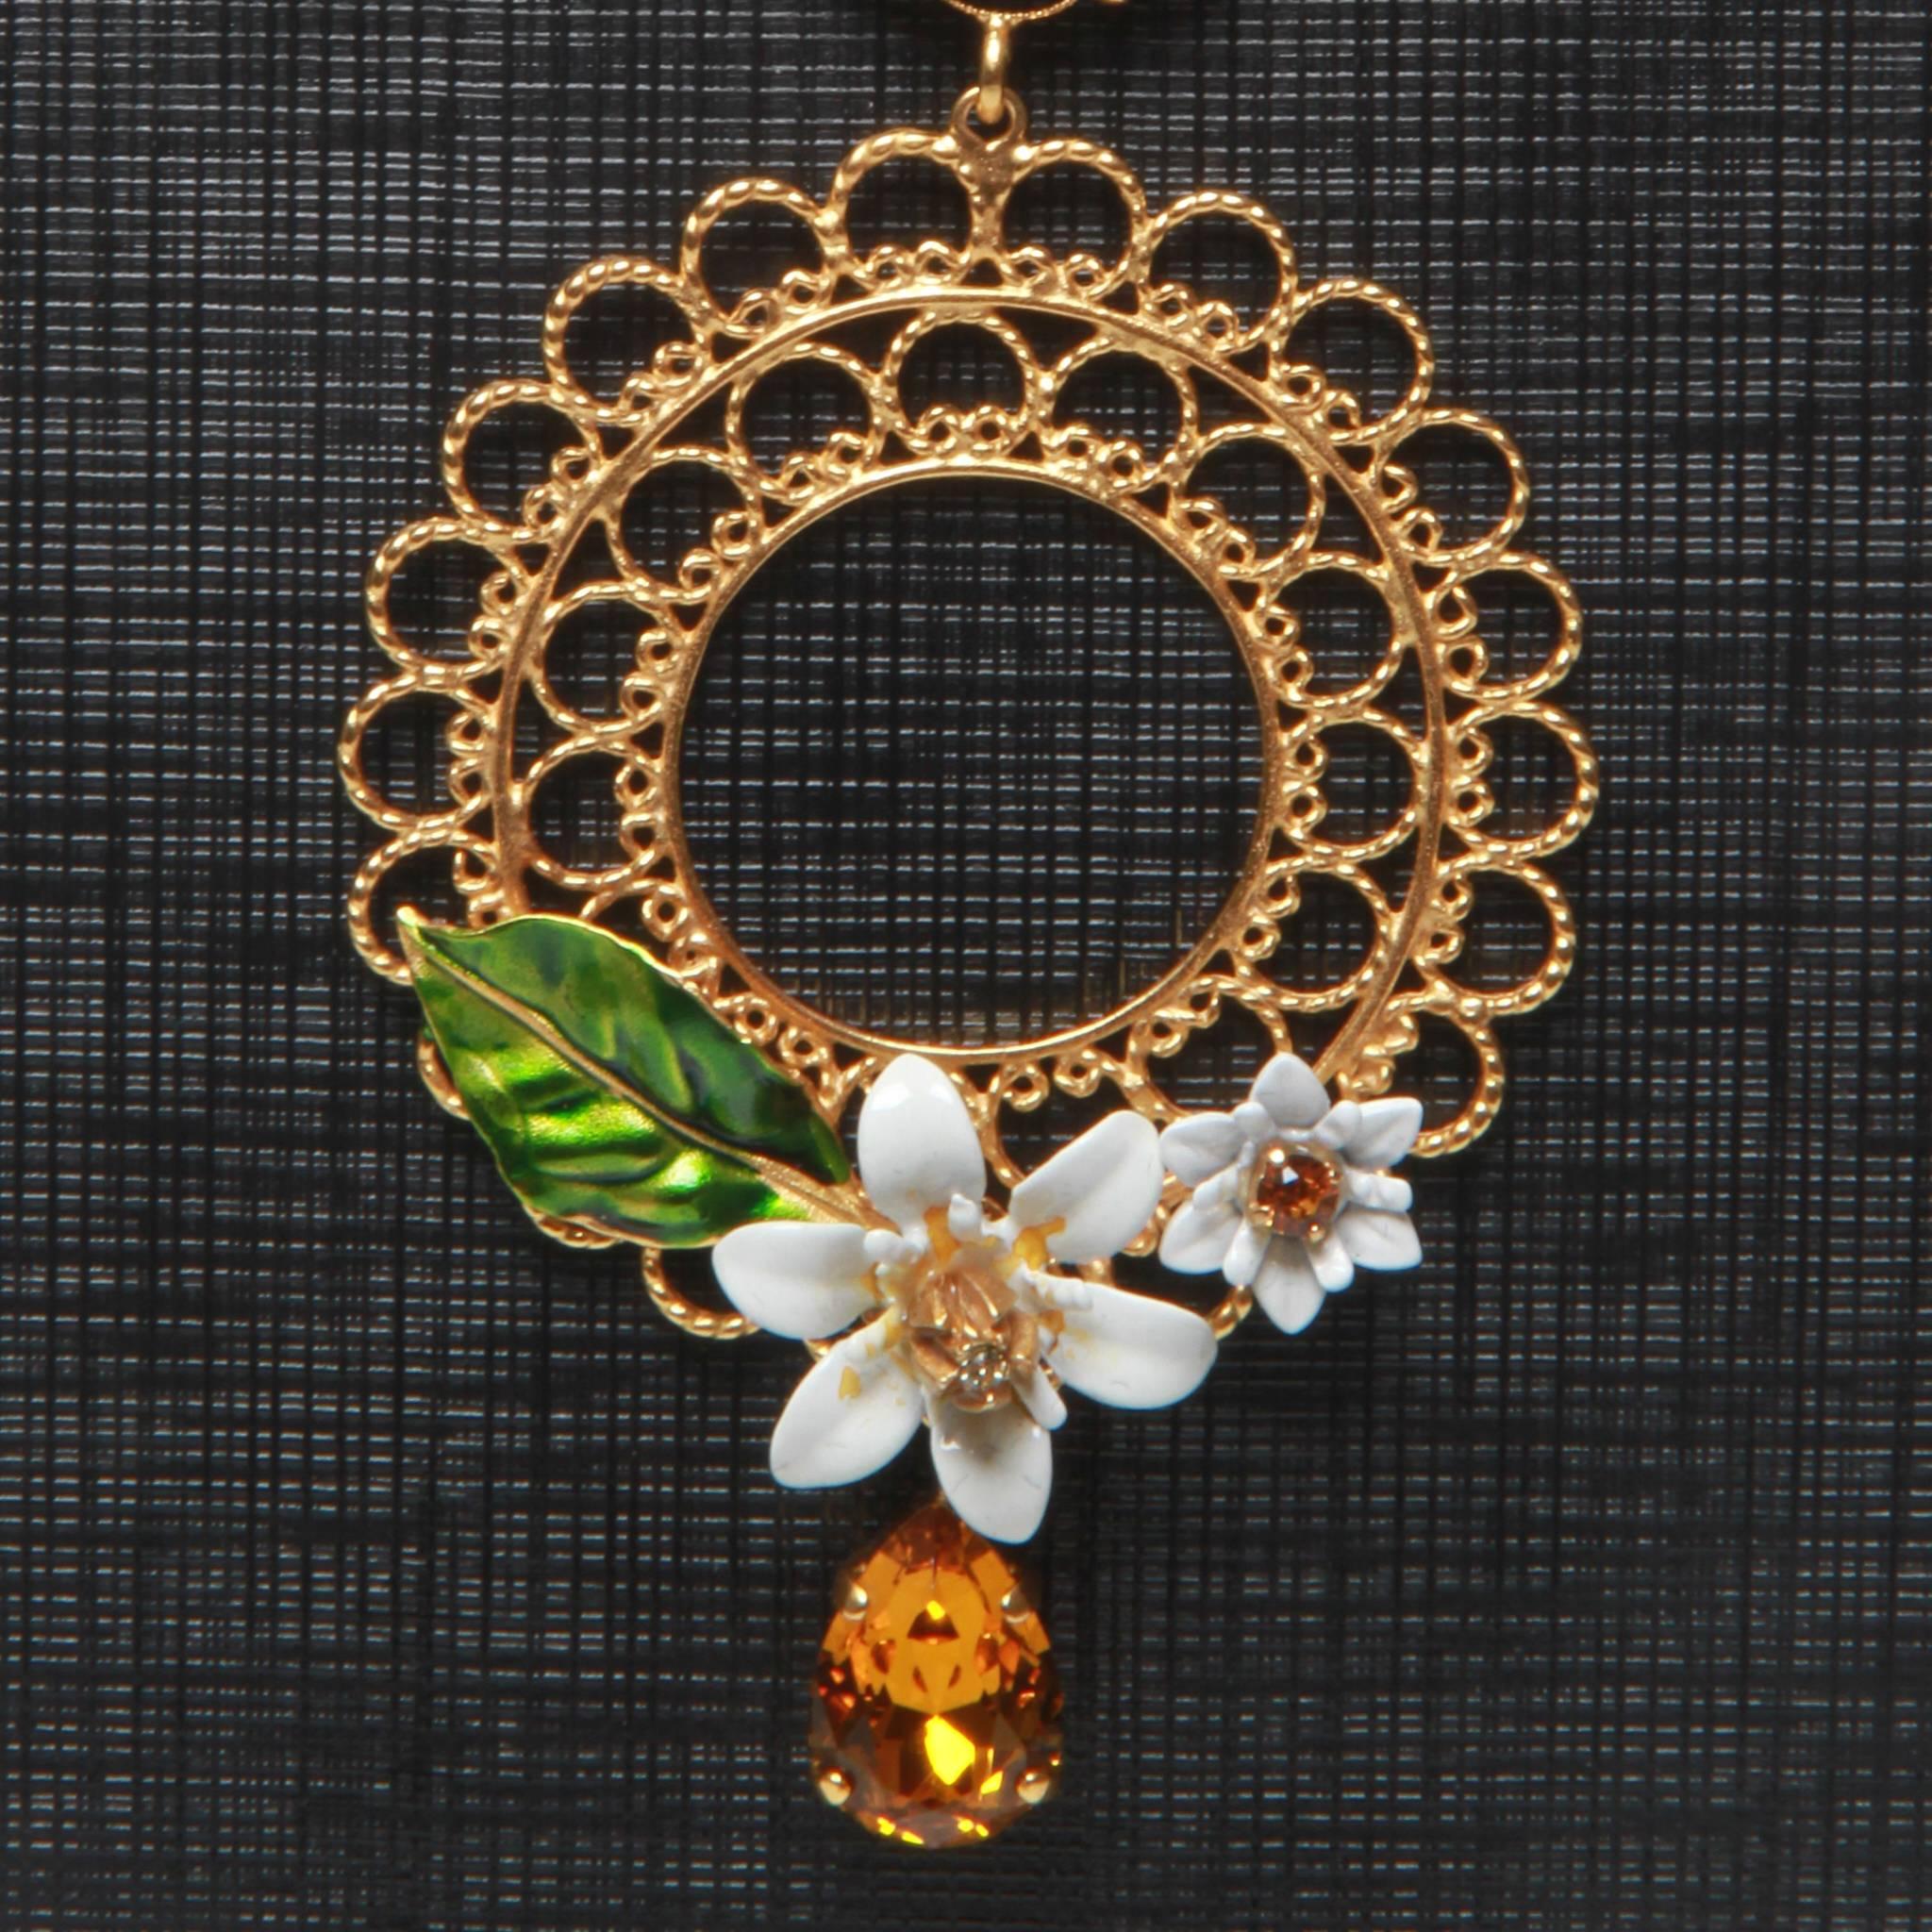 FINAL SALE
Madam Virtue & Co

Dainty Dolce and Gabbana gold-tone brass pendant necklace featuring an intricate mandala and floral design. Formed of brass with lacquered flowers and an apricot coloured droplet gem. This gem is repeated at the lobster